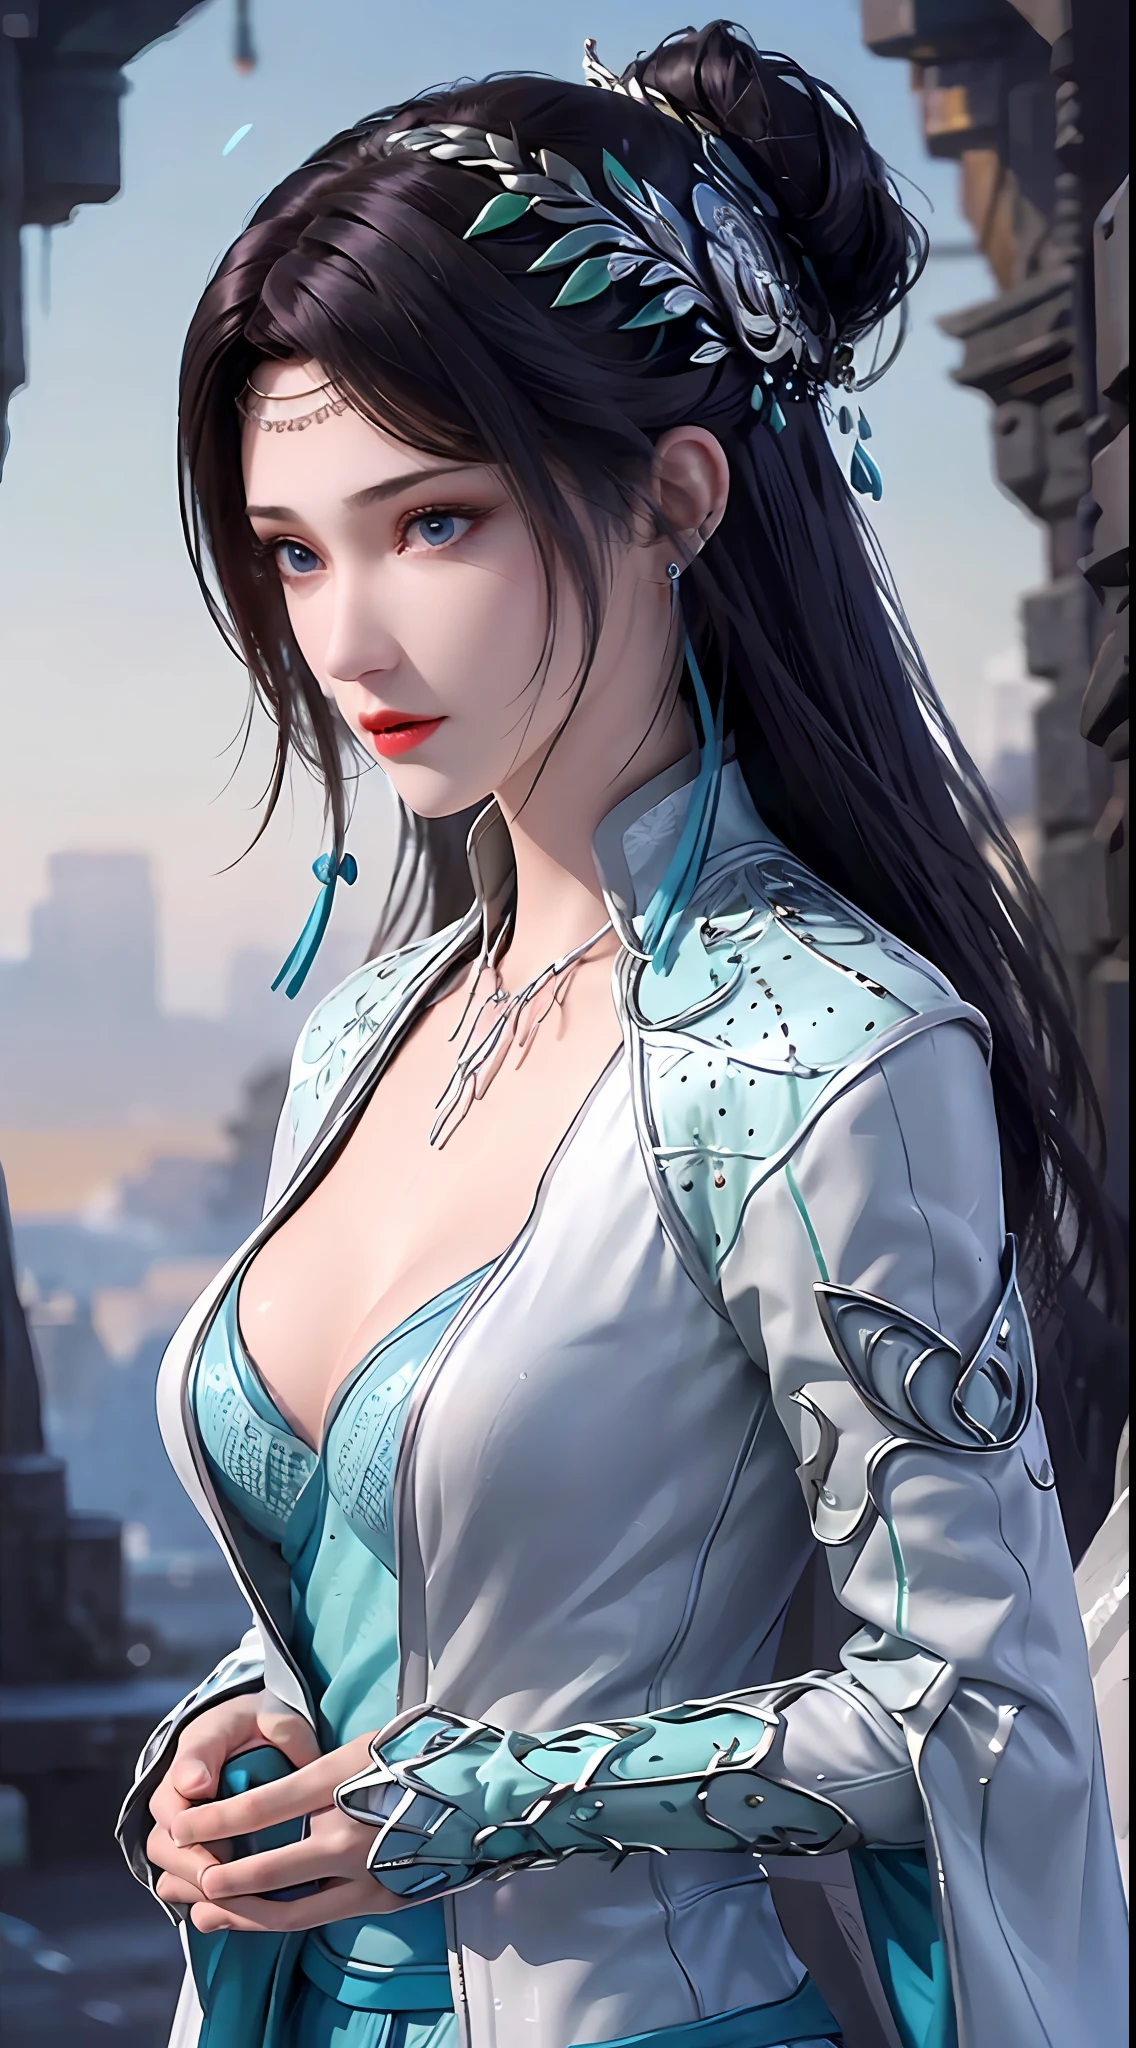 1 hot sexy beautiful girl in hanfu blue silk blouse, blue silk top with white pattern, white lace trim, long purple black ponytail, blue aura on the girl's back, hair jewelry, ear jewelry, necklace and necklace, big blue eyes meticulously made up, thin eyebrows, extremely detailed and sharp eye makeup, high nose, pretty red lips, no smile, pursed lips, rosy cheeks, enlarged breasts, large breasts, well-proportioned breasts, slim waist, blue mesh socks, wide sleeves, Chinese hanfu style, fantasy art motifs, vivid and realistic colors, RAW photo, realistic photo, ultra high quality 8k surreal photo, (great lighting effect: 1.8), 10x pixels, magic effect (background): 1.8), super detailed eyes, half girl upper body, girl portrait, girl alone, hanfu historical background,